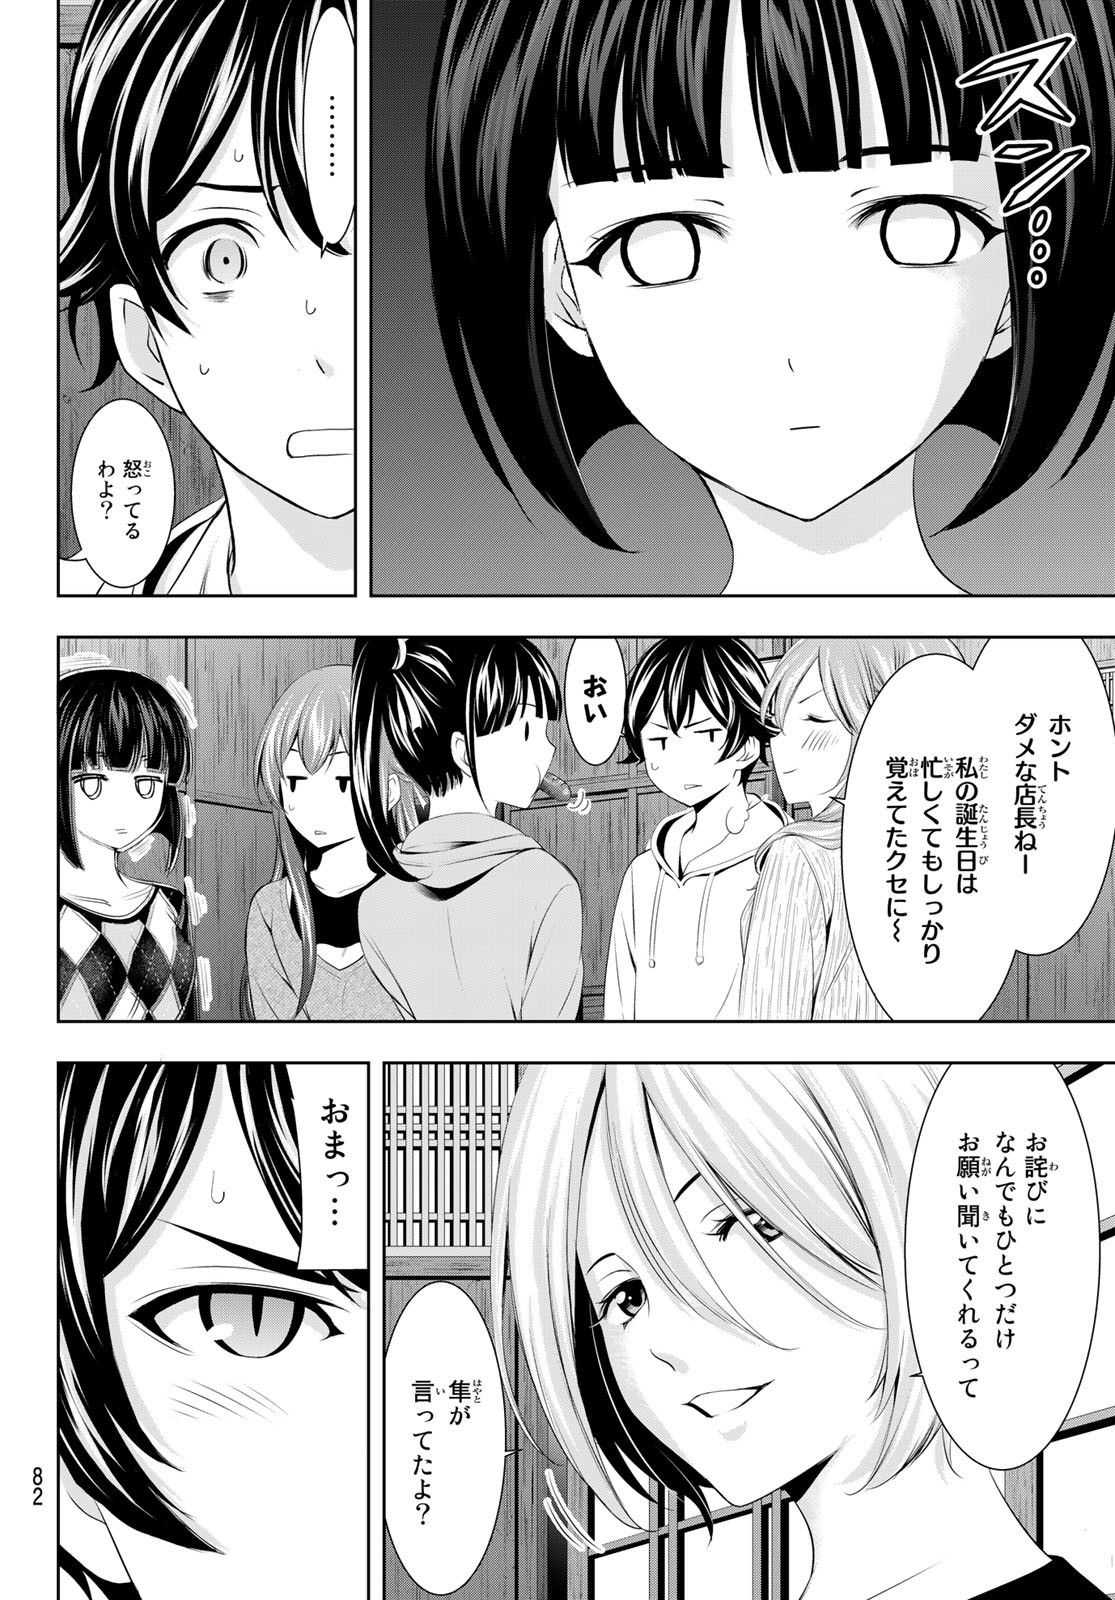 Goddess-Cafe-Terrace - Chapter 068 - Page 4